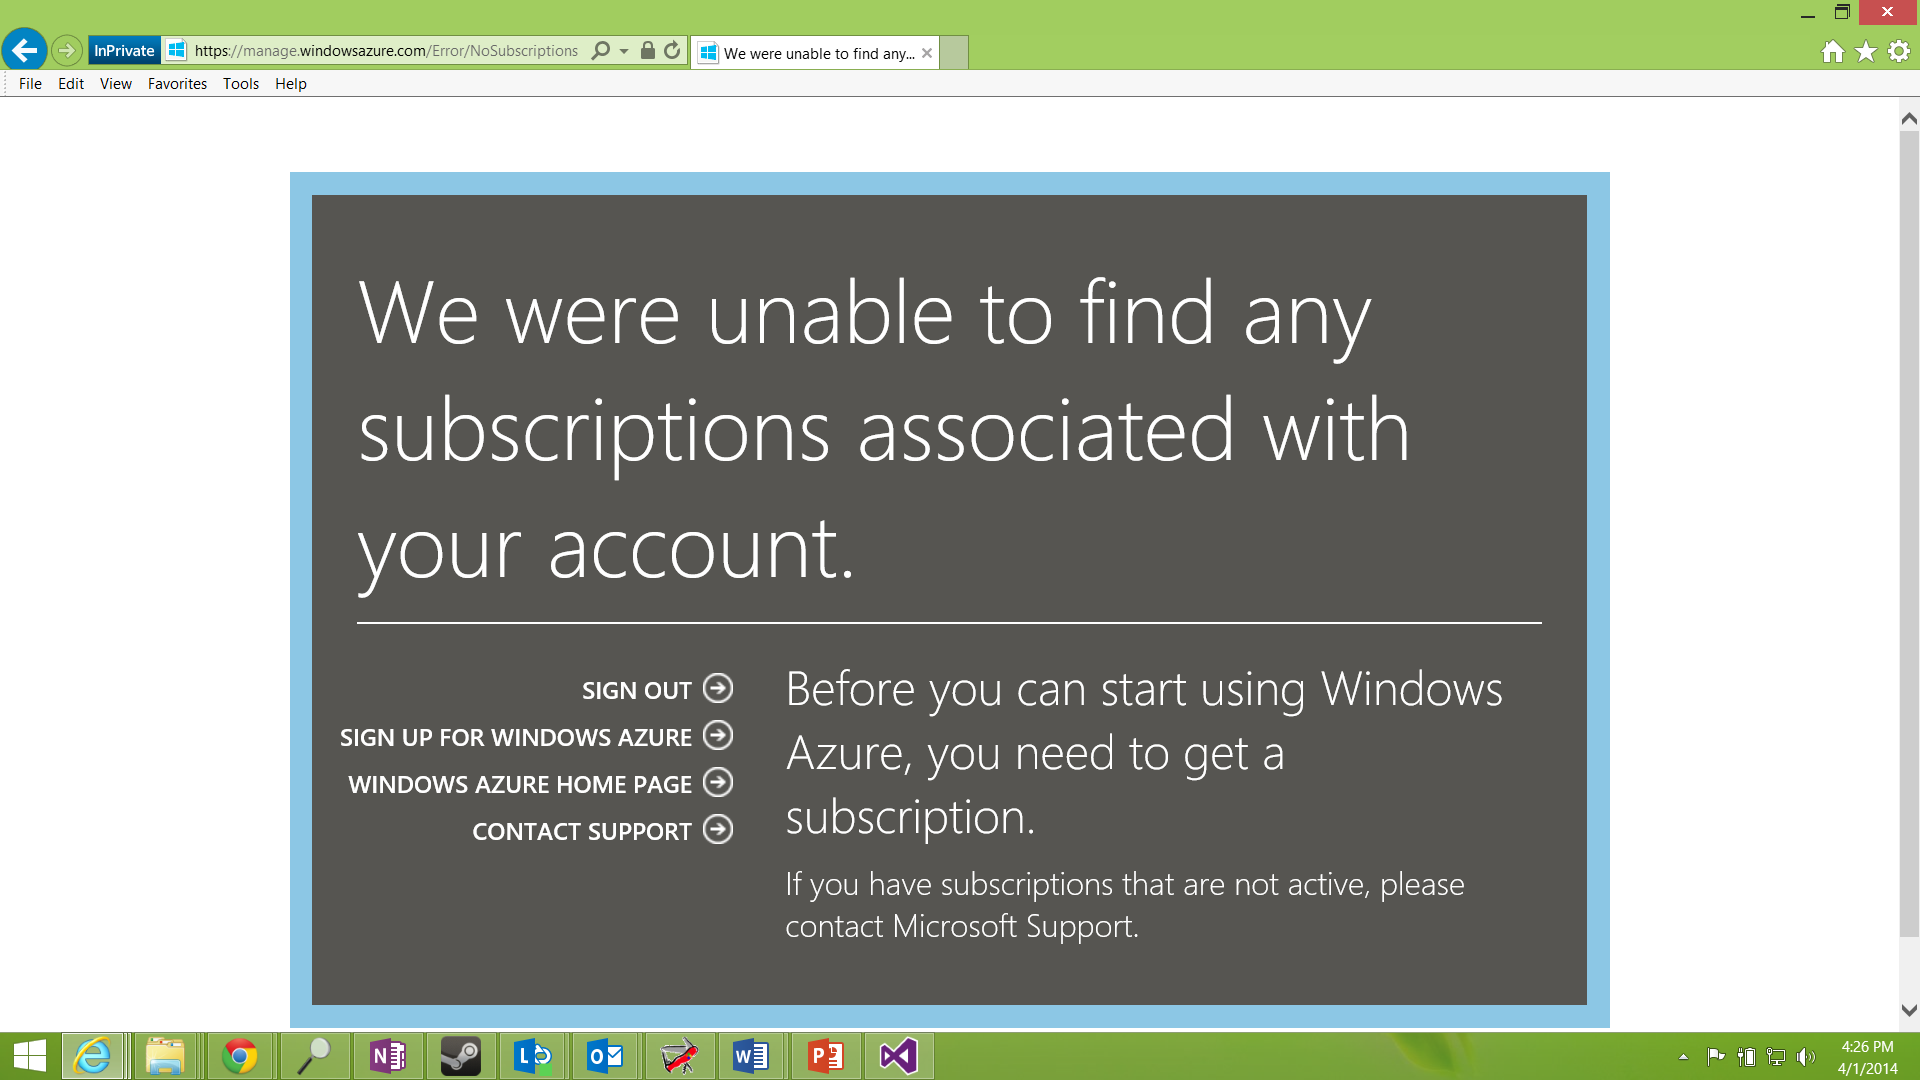 A screenshot of the error page that displays when there is no Azure subscription for the account. This page has a link to the Azure sign-up page.